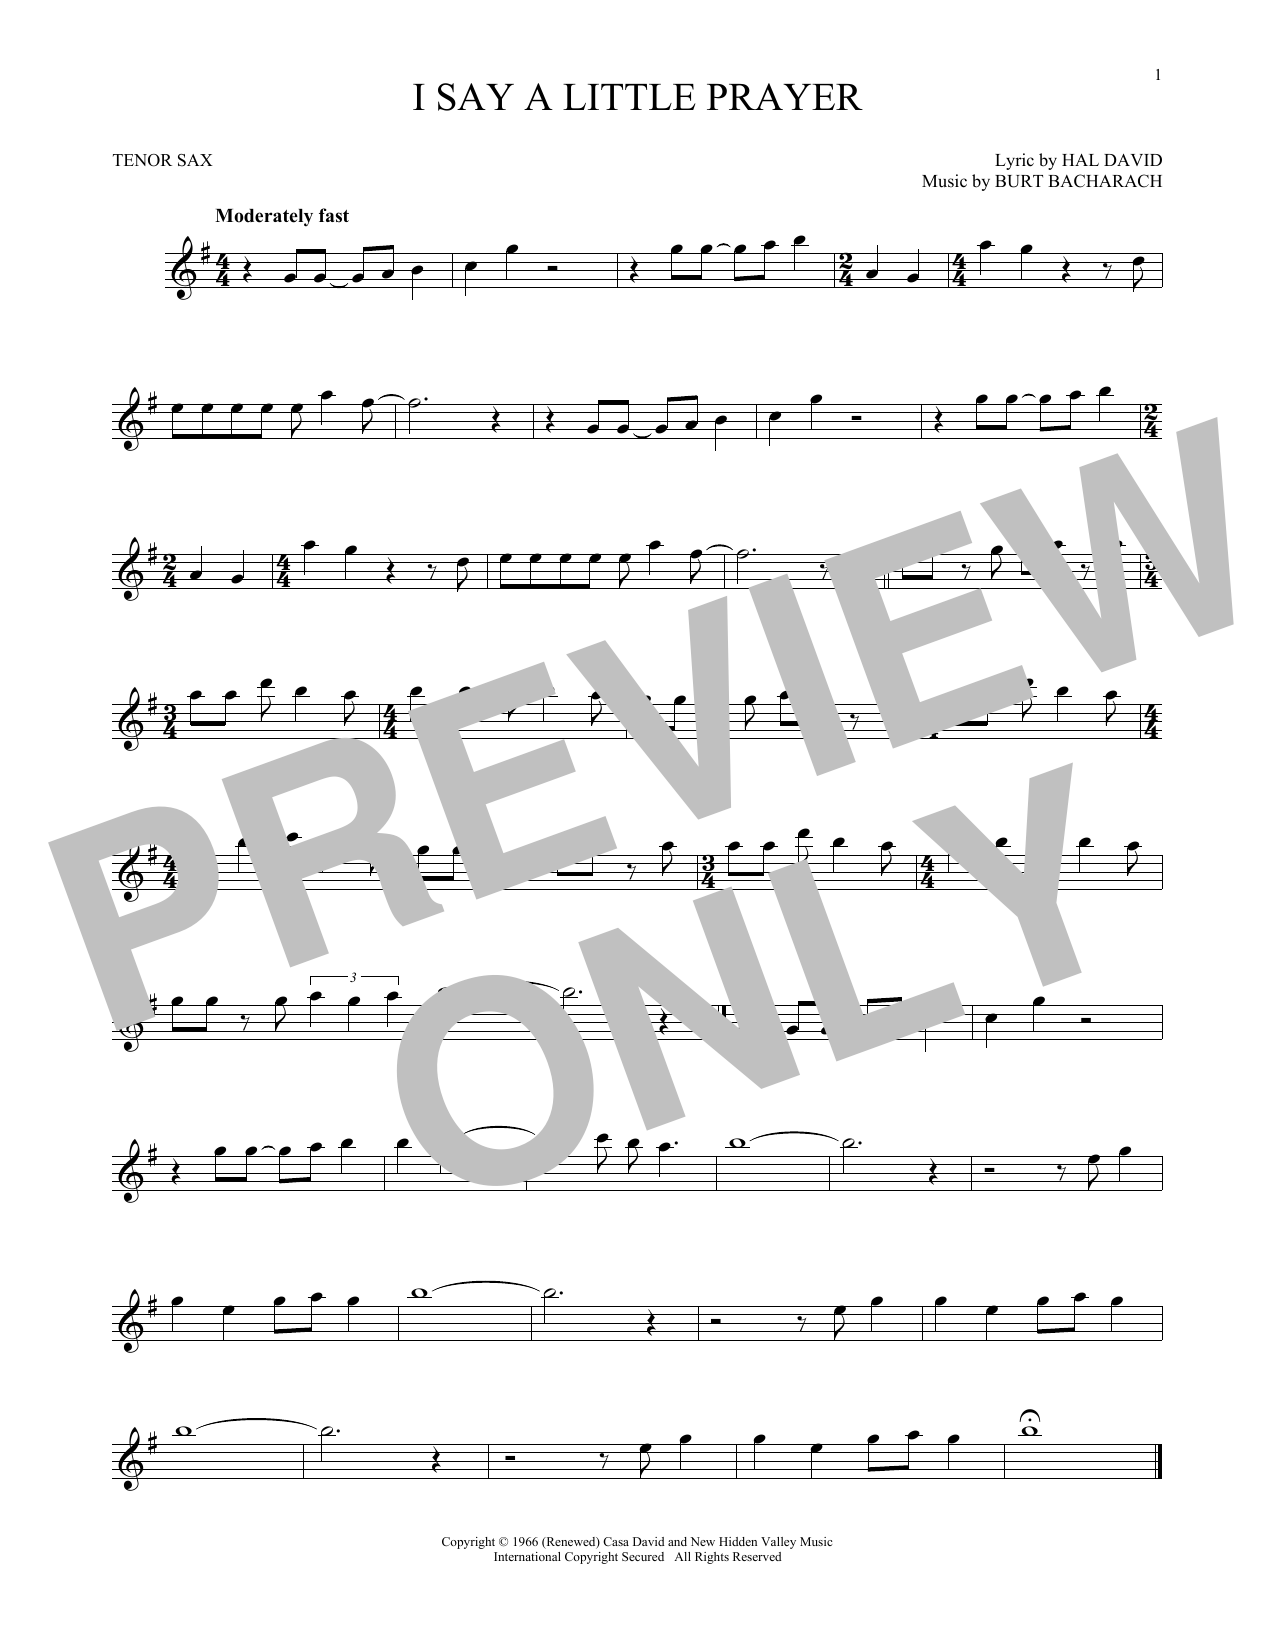 Aretha Franklin I Say A Little Prayer sheet music notes and chords. Download Printable PDF.